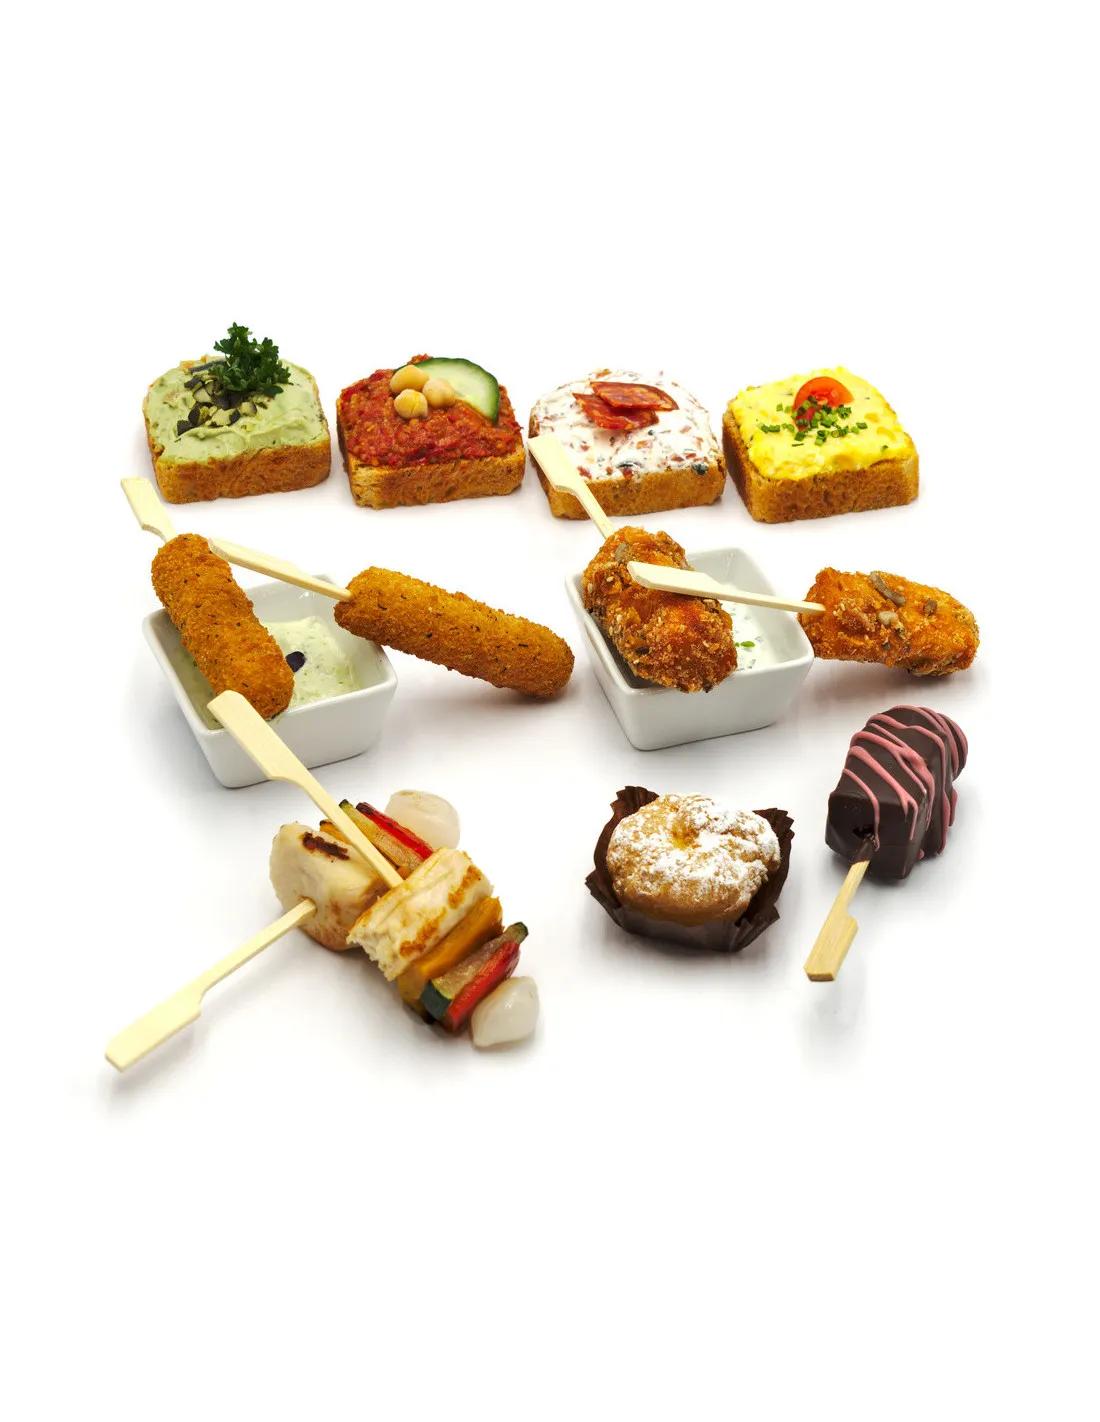 Fingerfood-Package 2 | Fingerfood by MOLO